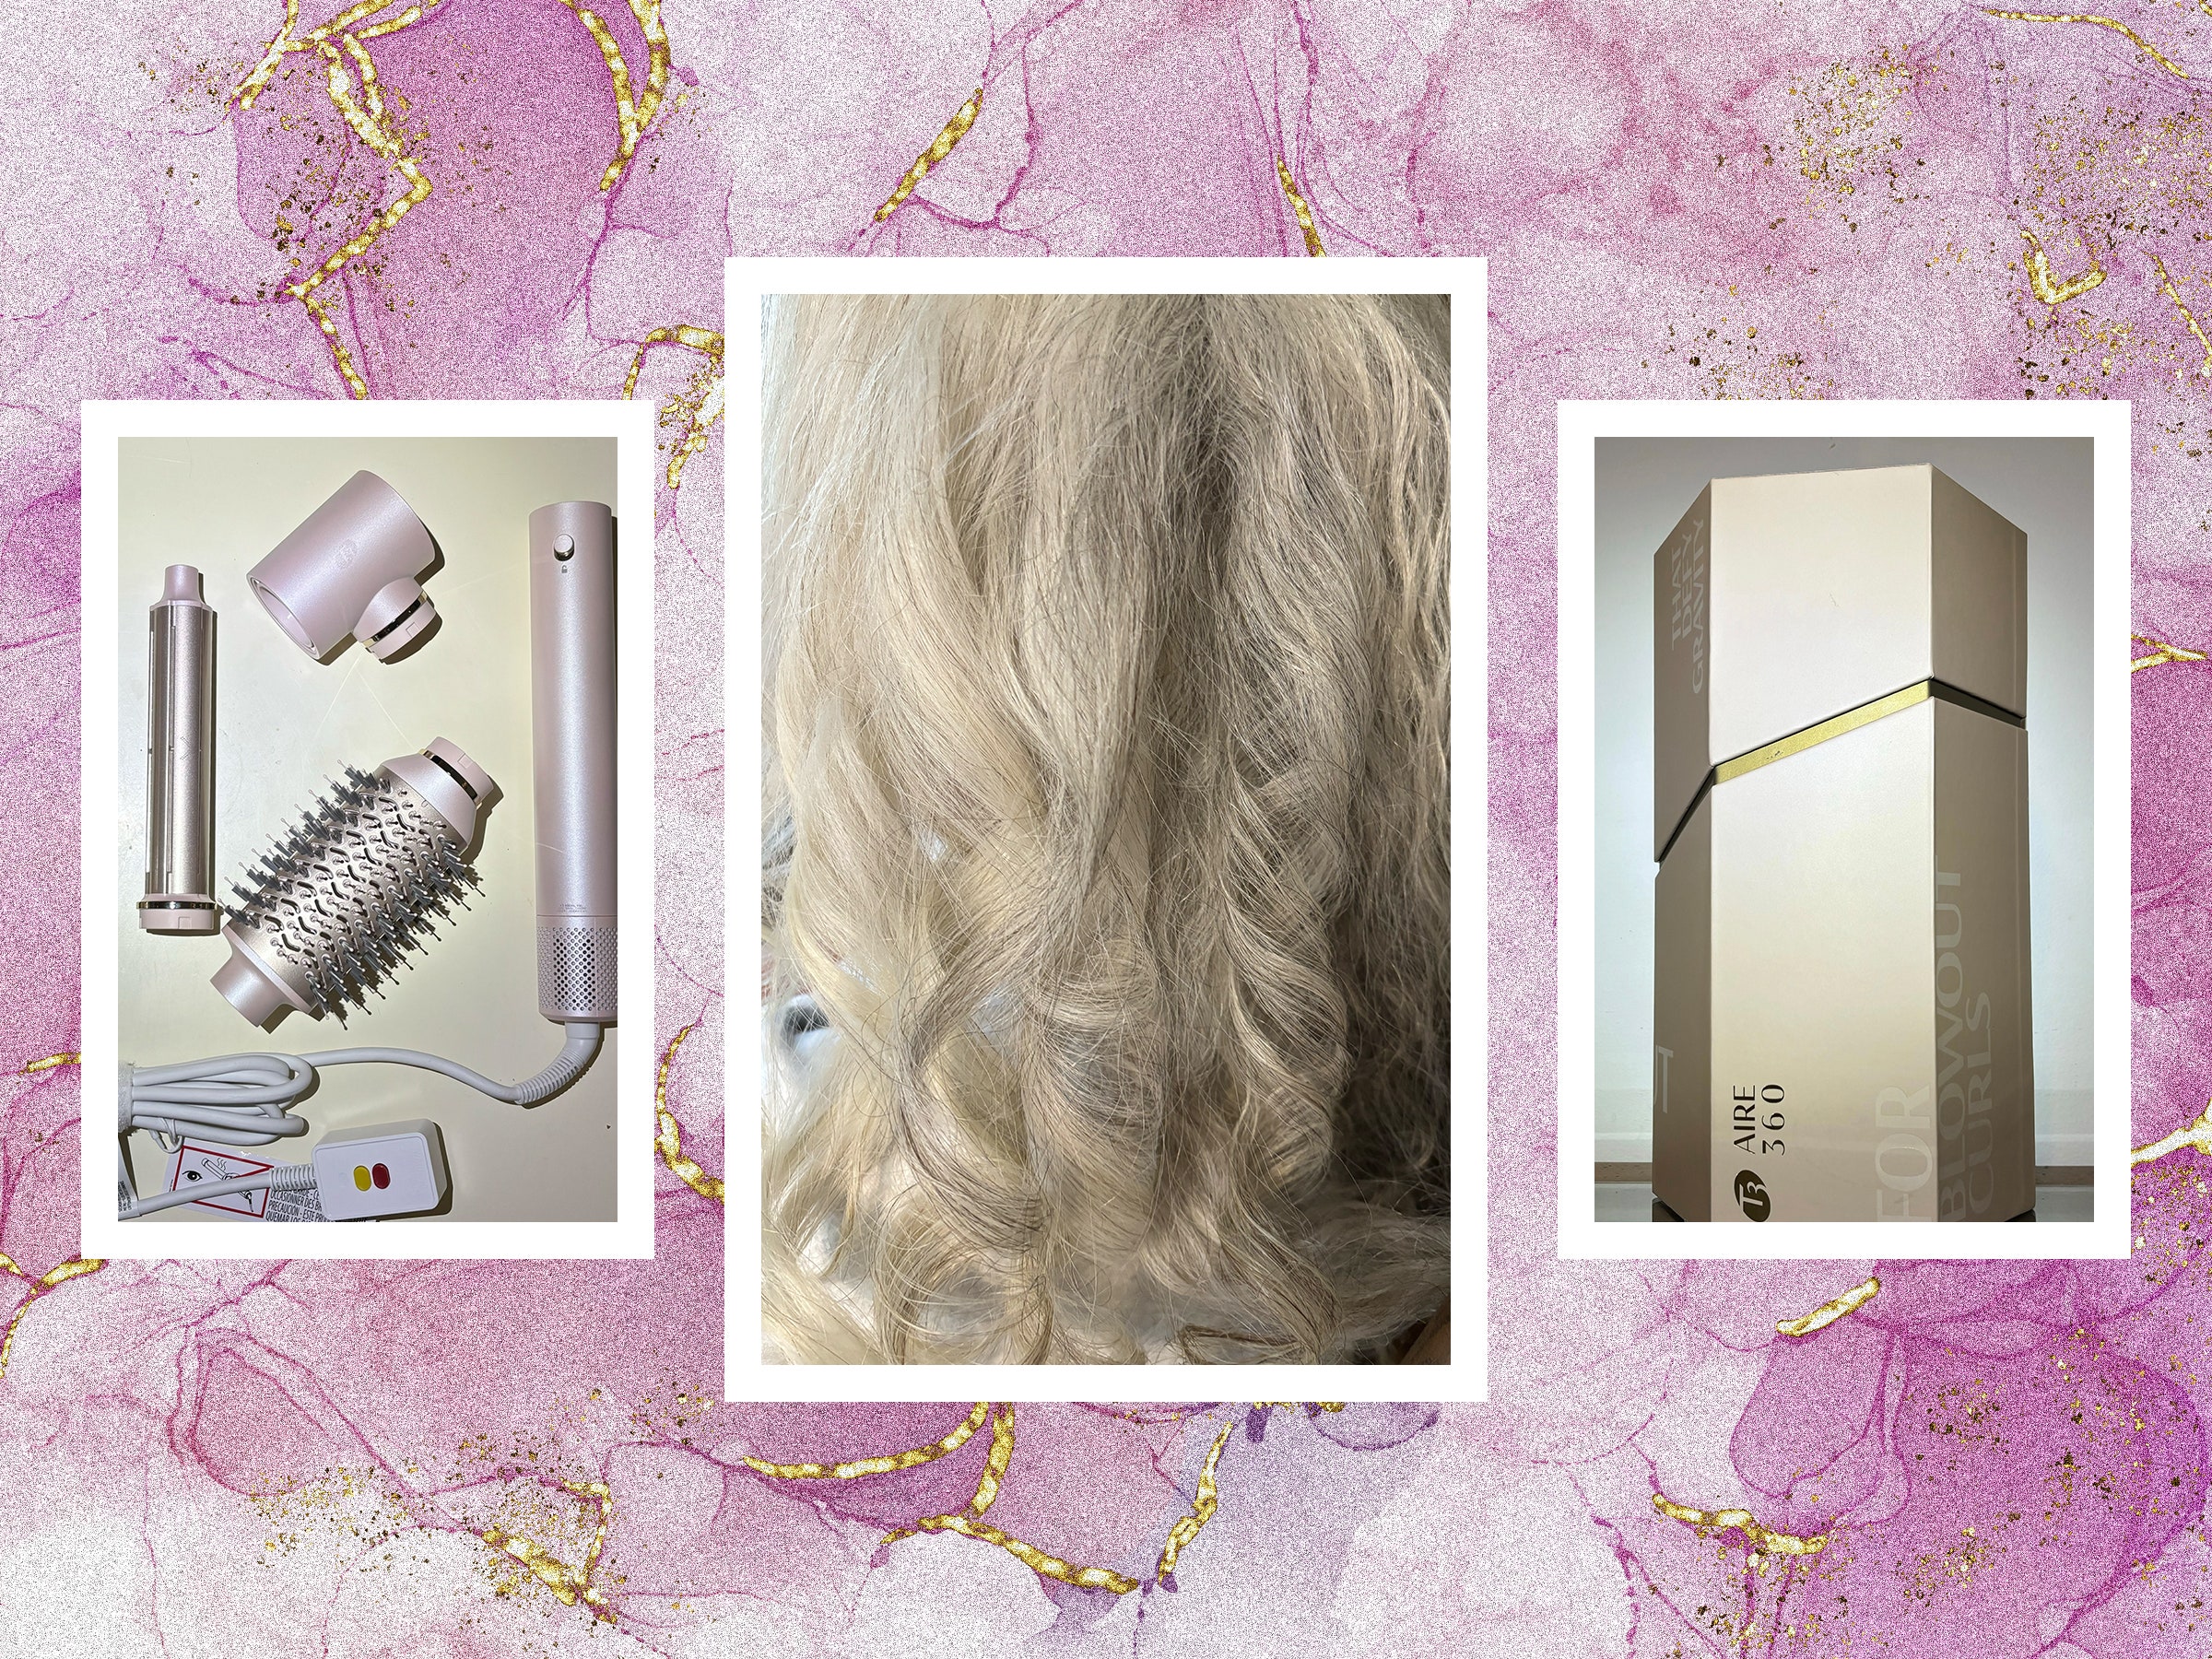 Left to right hair styler attachments including curling rods and brush closeup view of a curled white hair and gold...